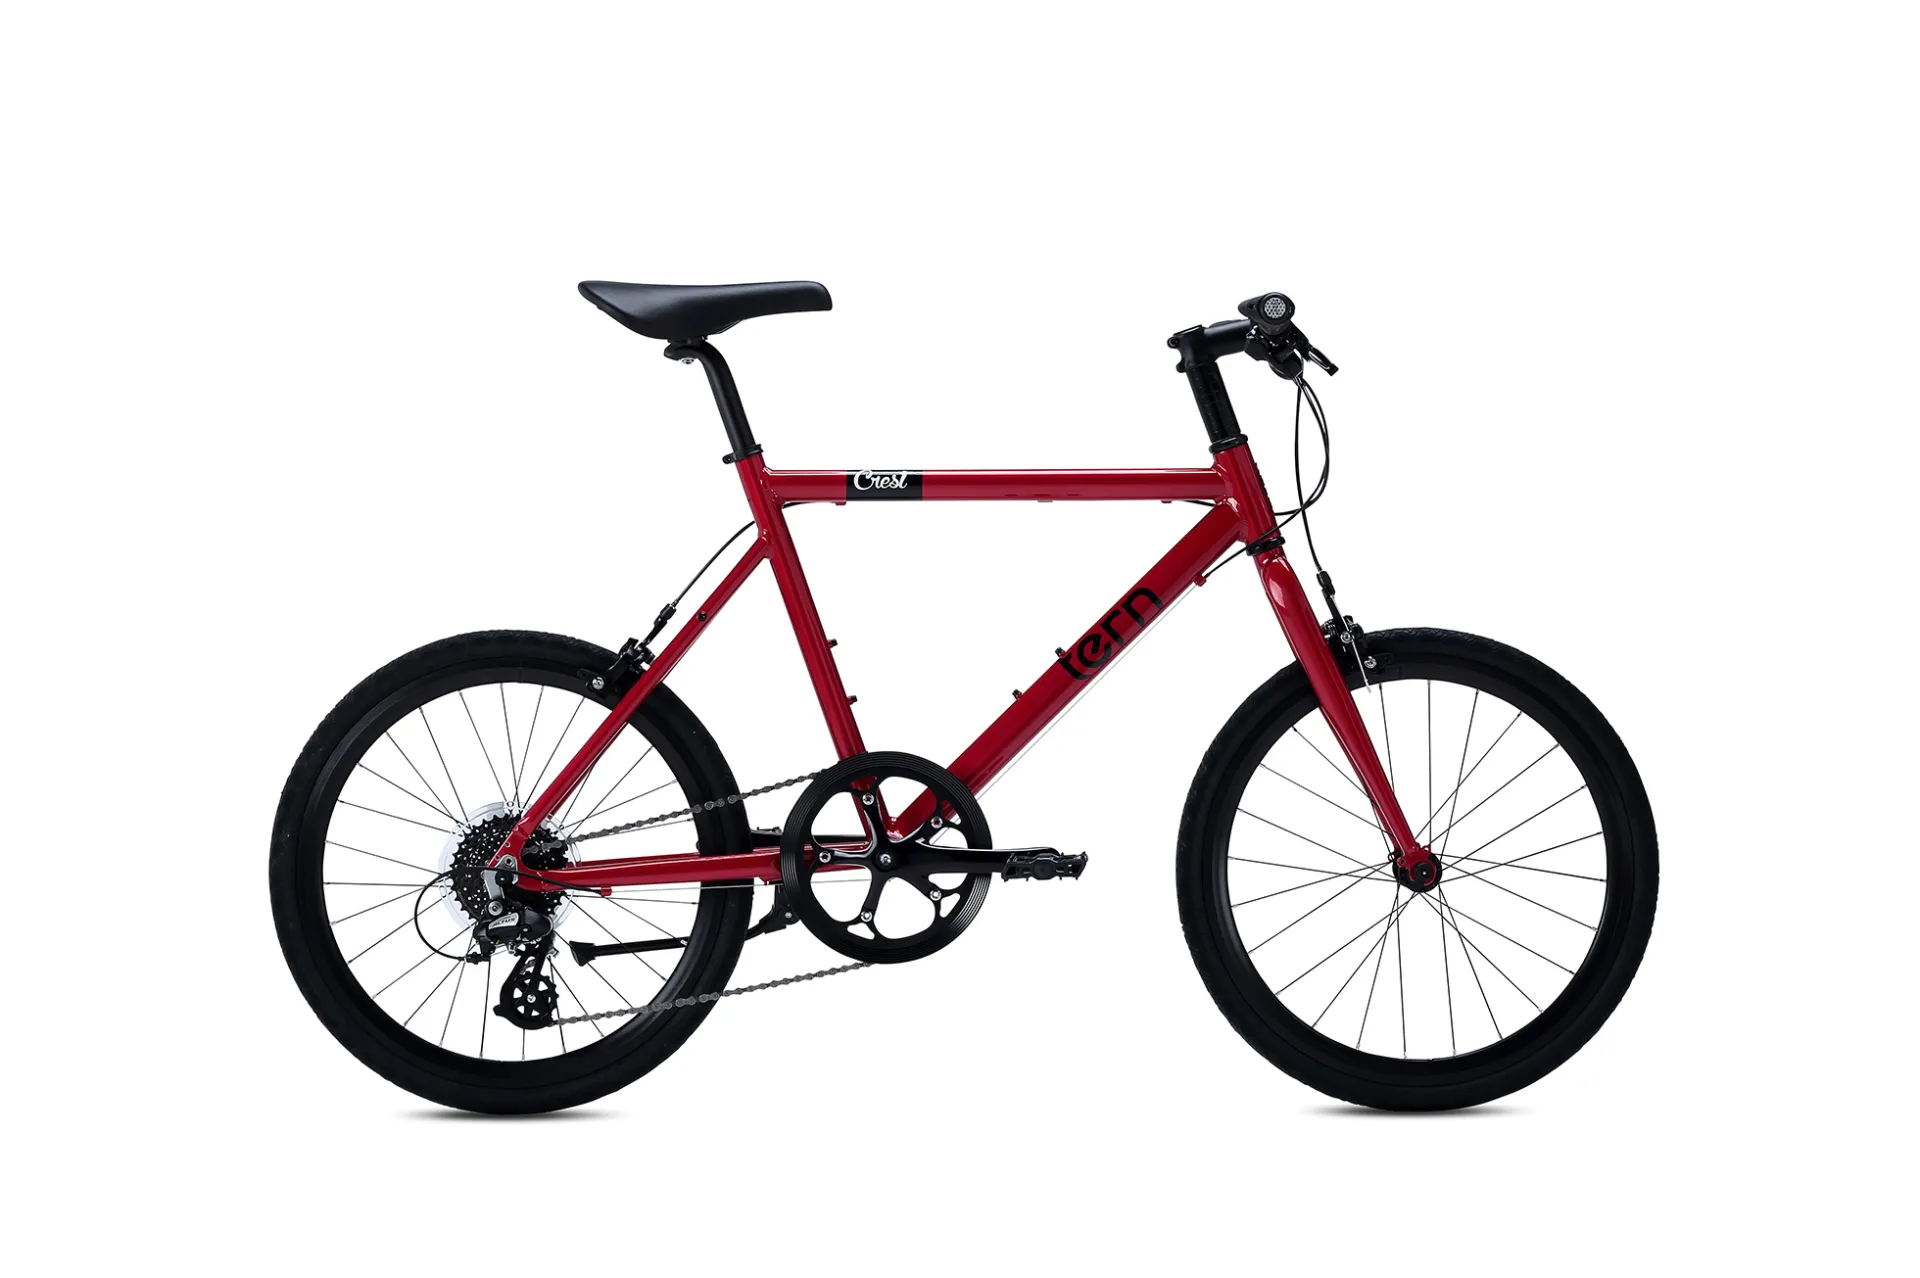 Crest | Tern Bicycles